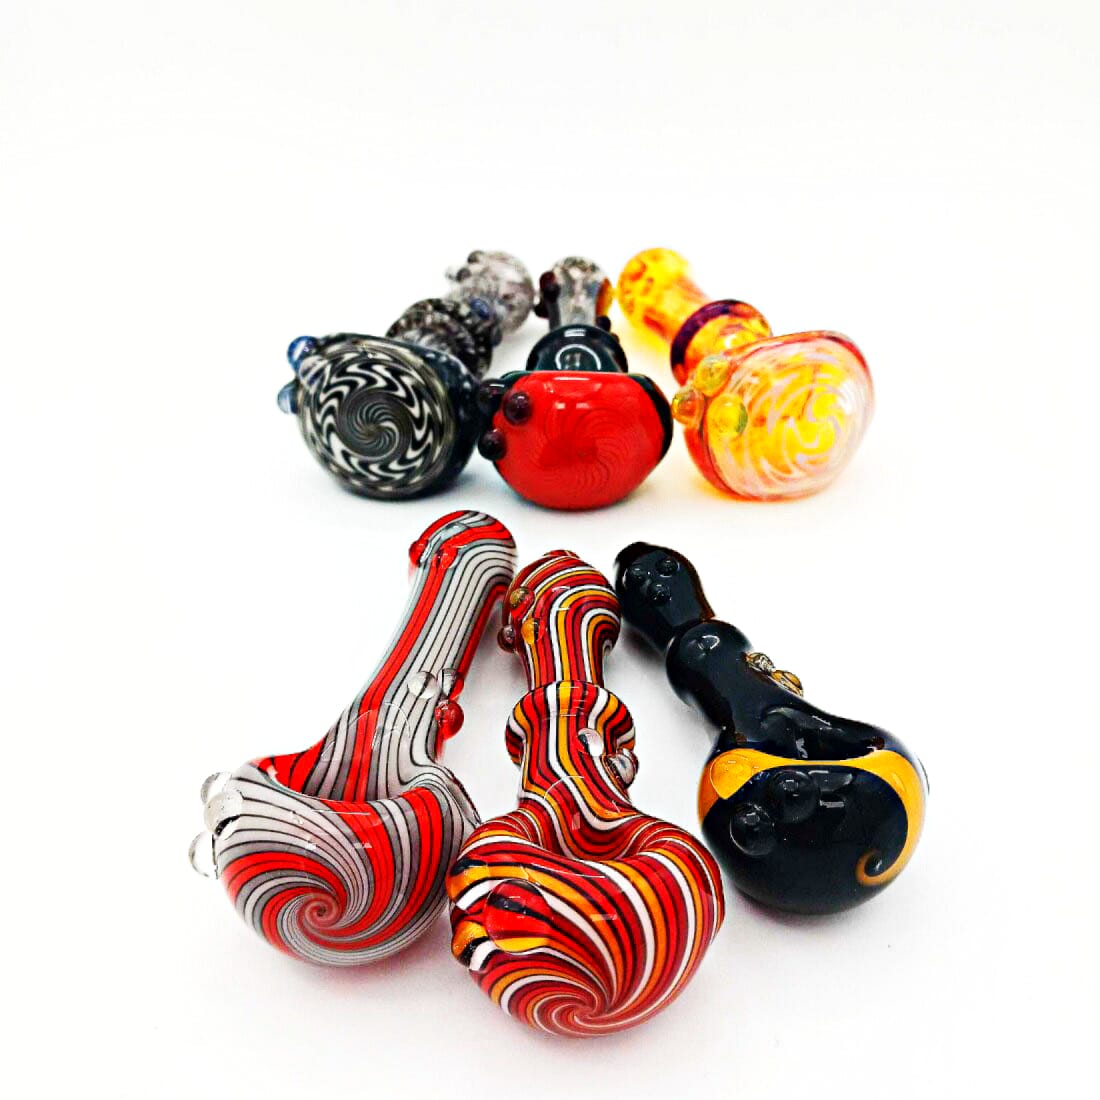 Shop Glass Hand Pipes - Find the Perfect Glass Smoking Bowl with